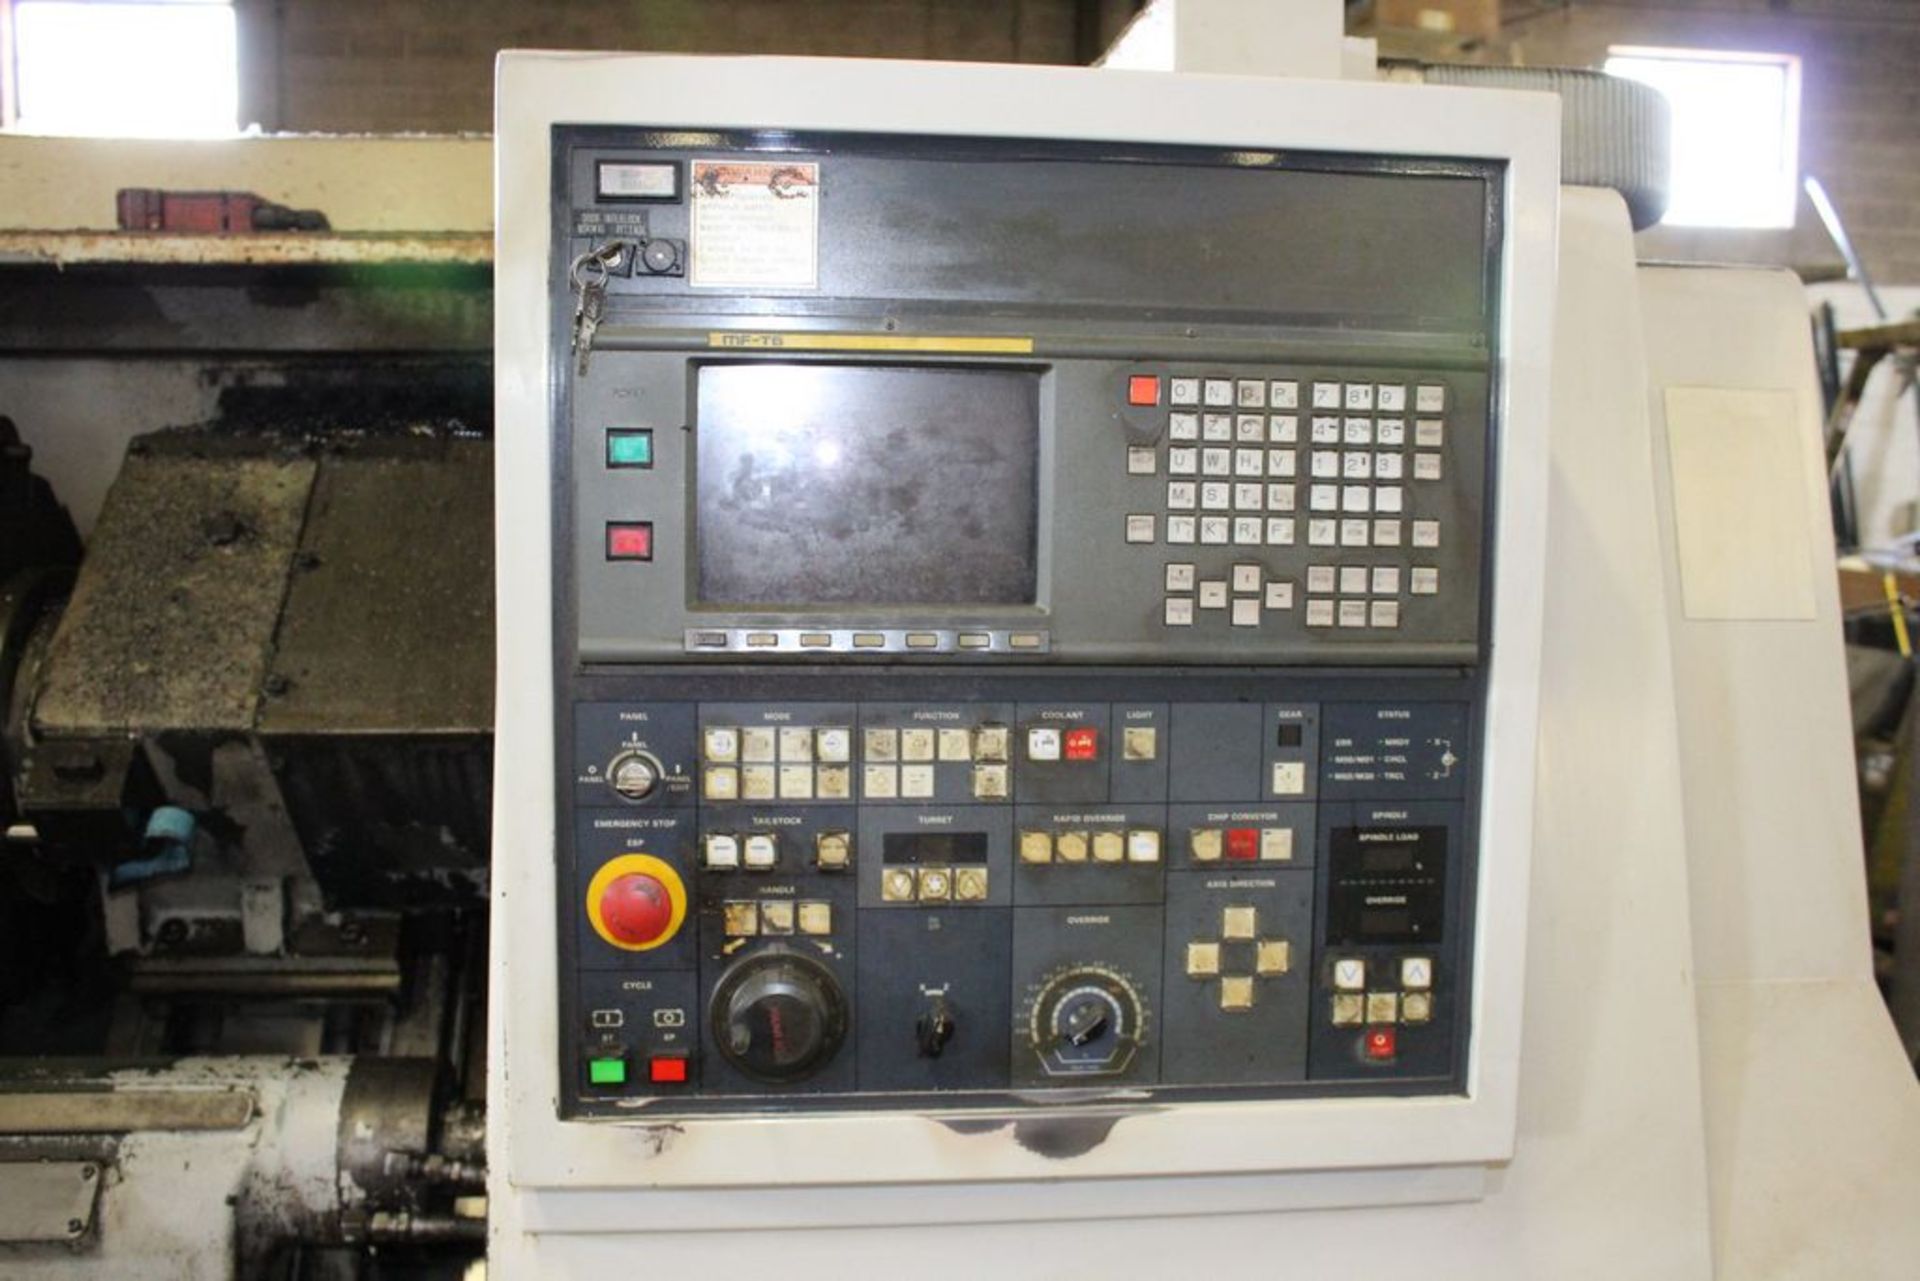 MORI SEIKI MODEL SL-25 CNC TURNING CENTER, S/N 6521, 10ö 3-JAW CHUCK, TAILSTOCK, MF-T6 CONTROL, WITH - Image 6 of 6